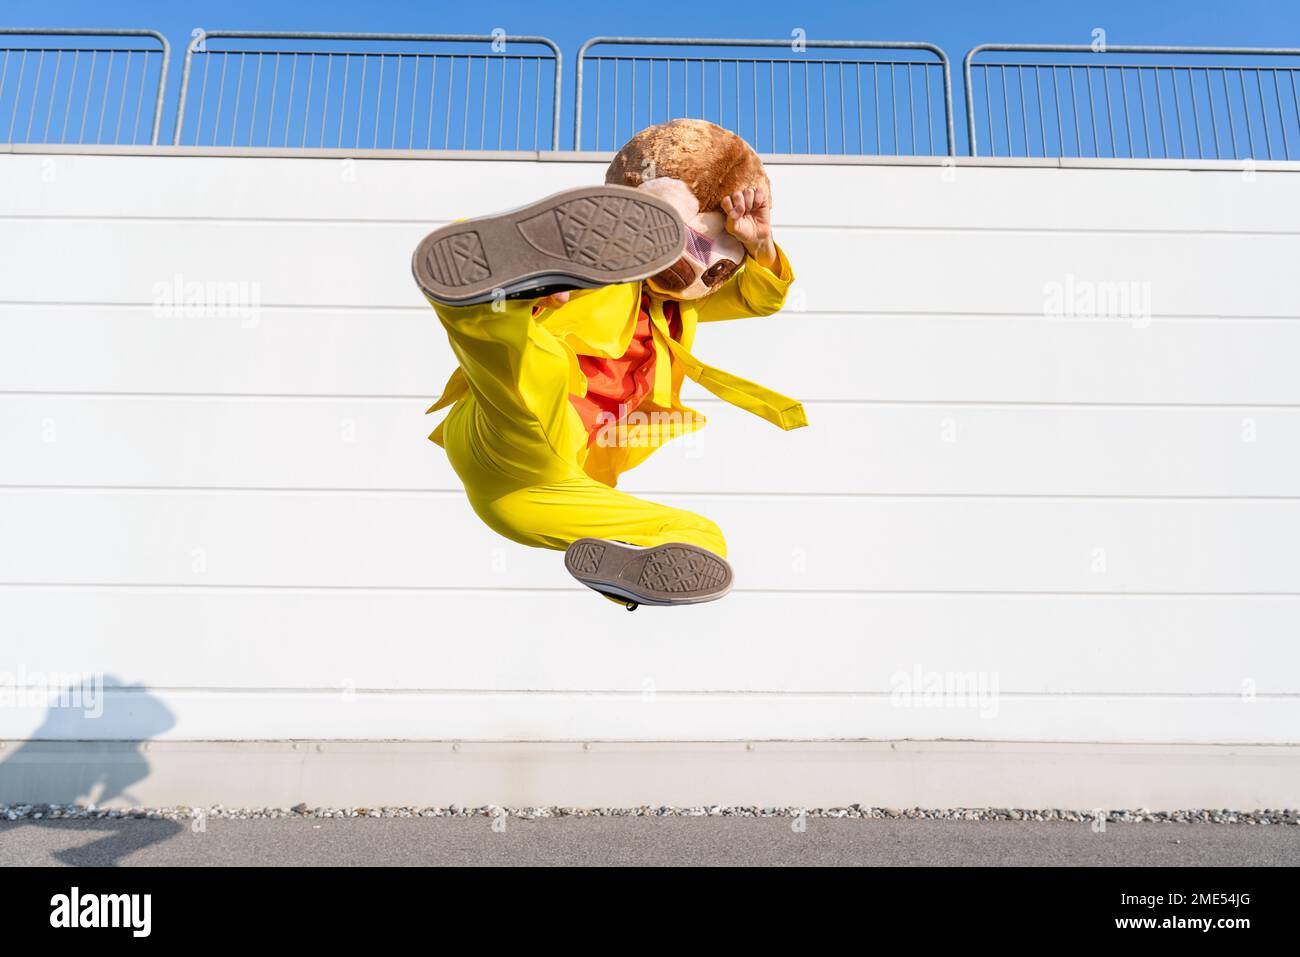 Man wearing animal mask kicking and jumping in front of wall Stock Photo